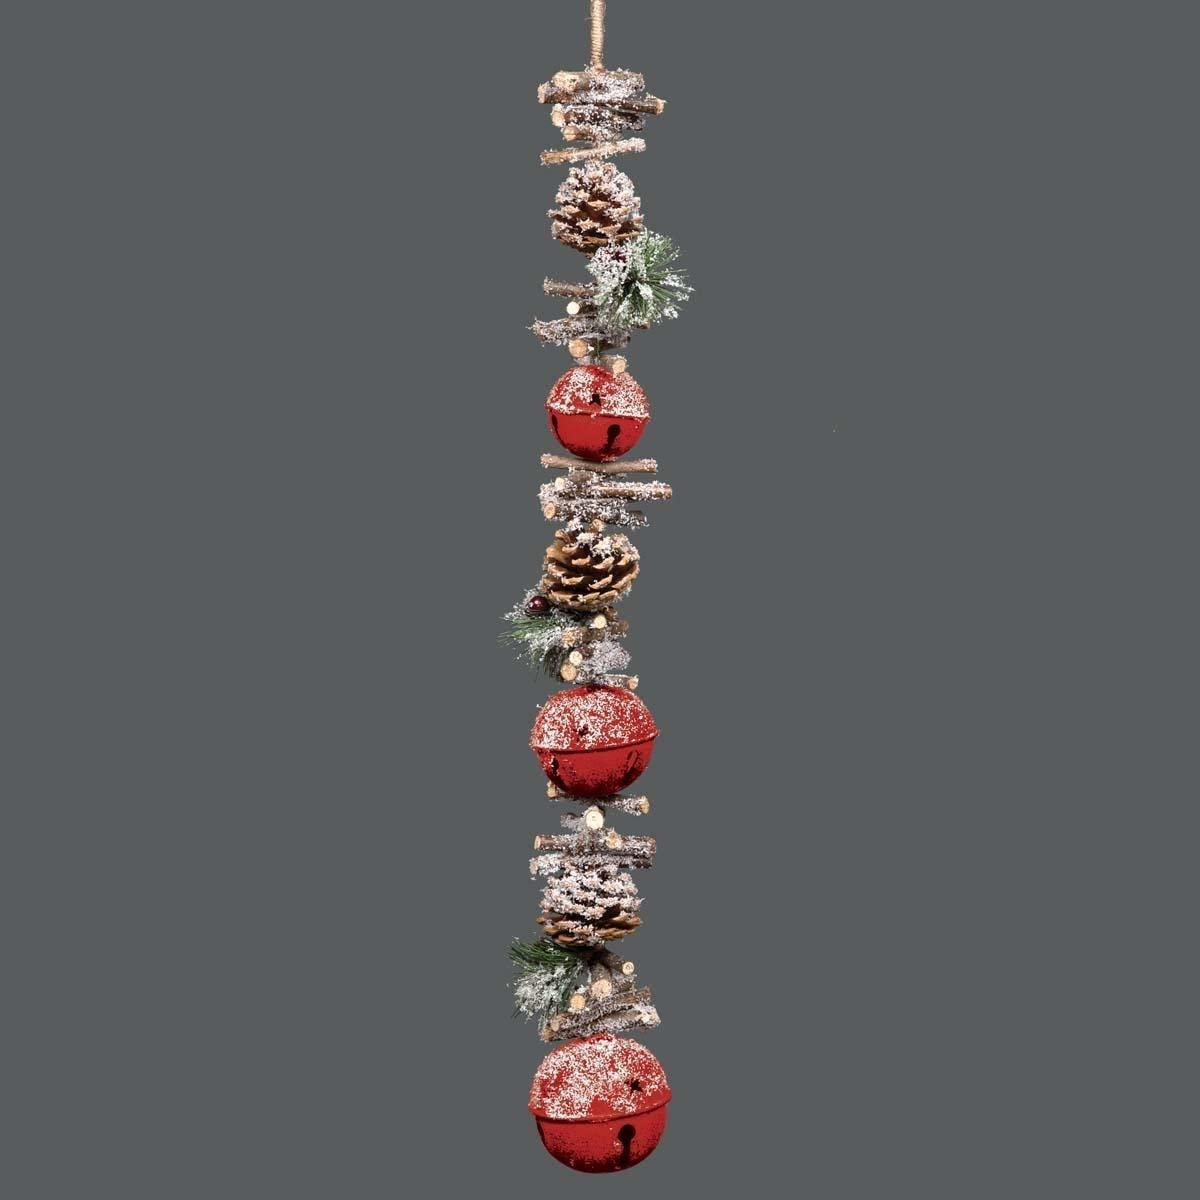 Hanging Decoration with Jingle Bells Wooden Sticks, Berries and Pinecones Christmas Home Wall Door 90cm Red - image 1